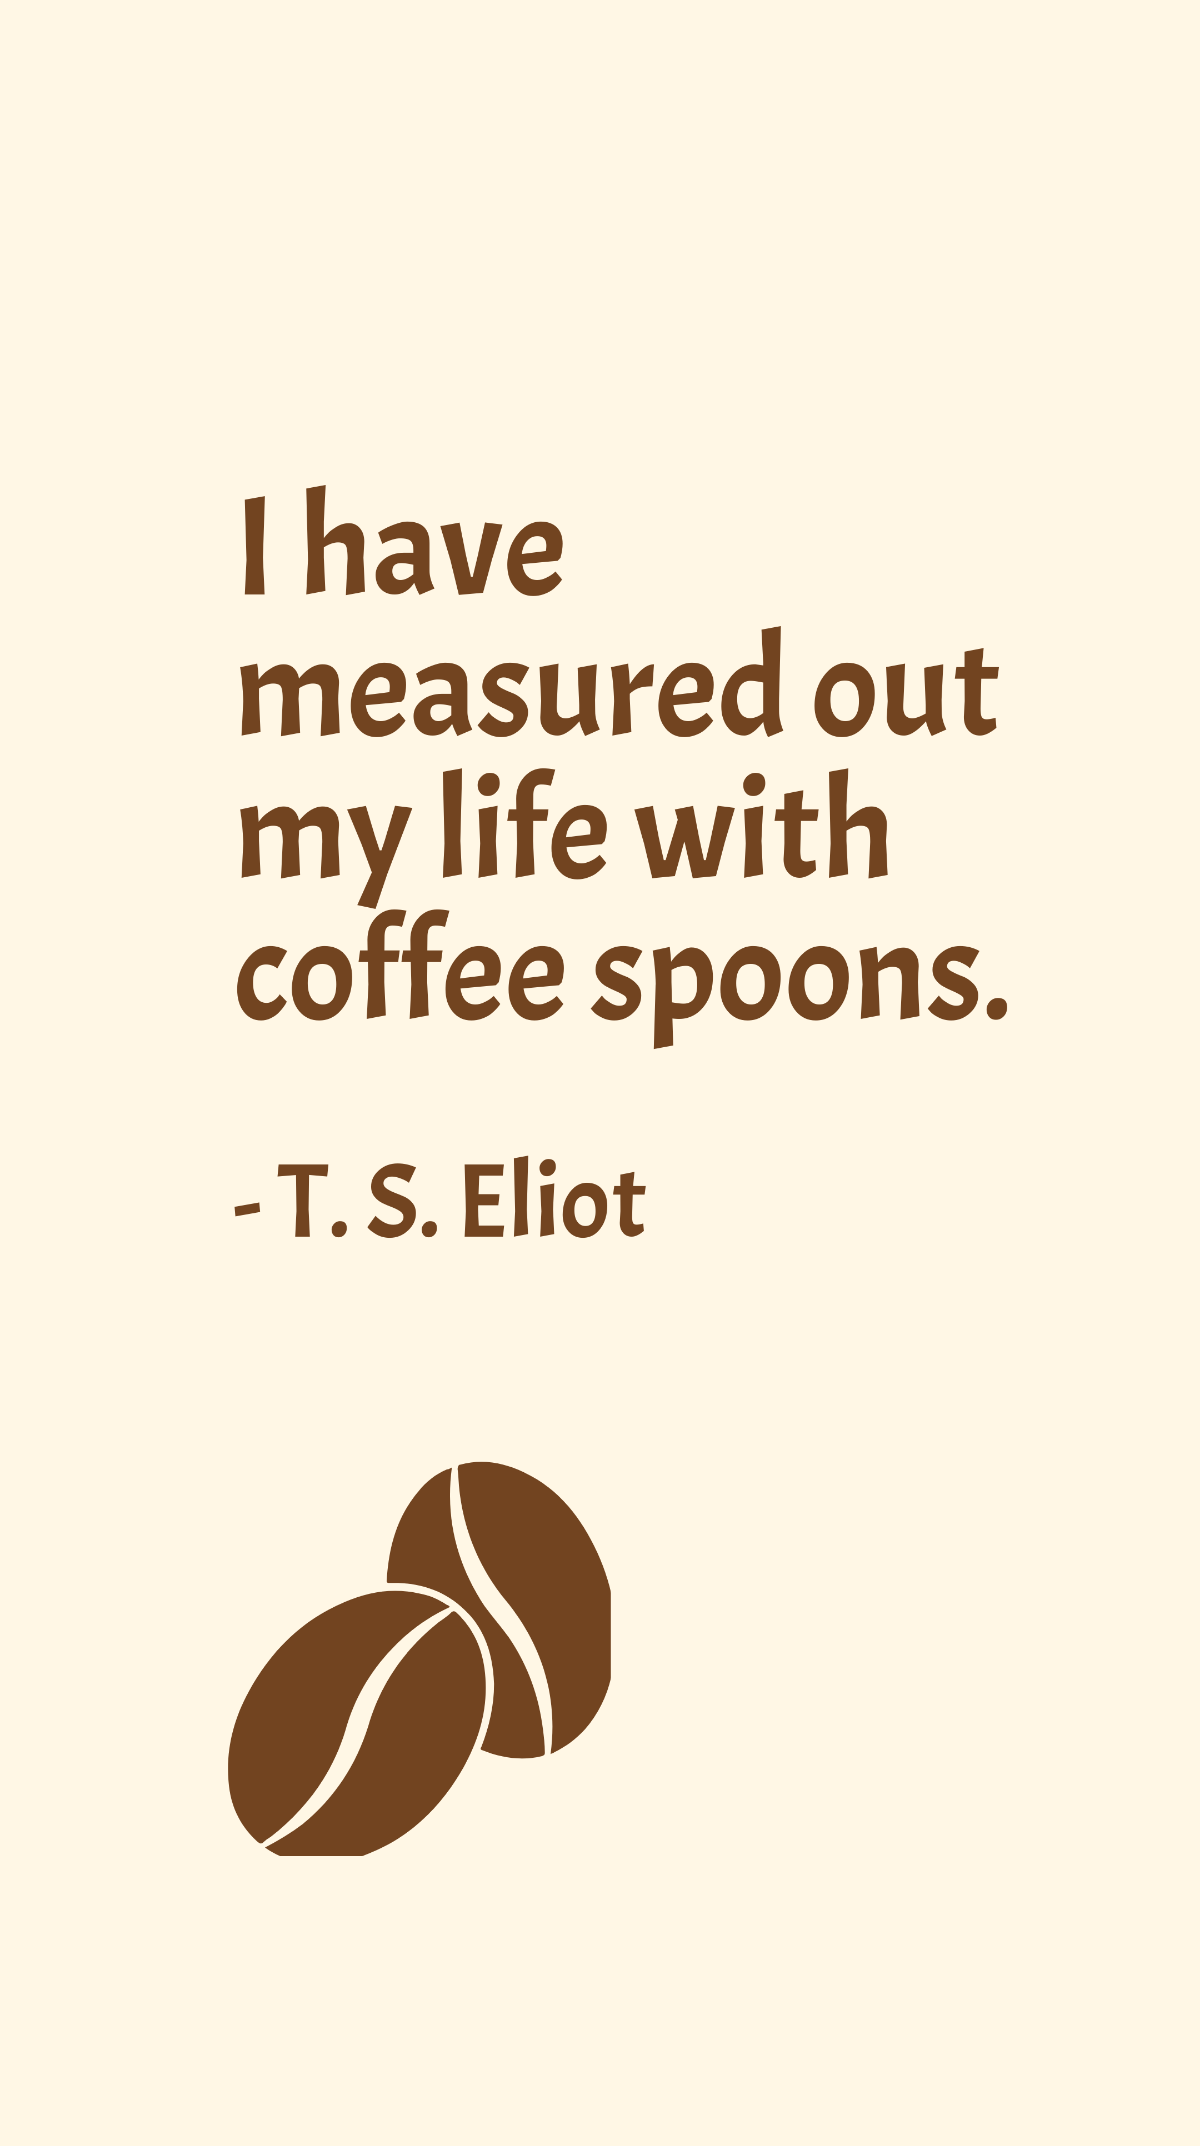 Free T. S. Eliot - I have measured out my life with coffee spoons. Template